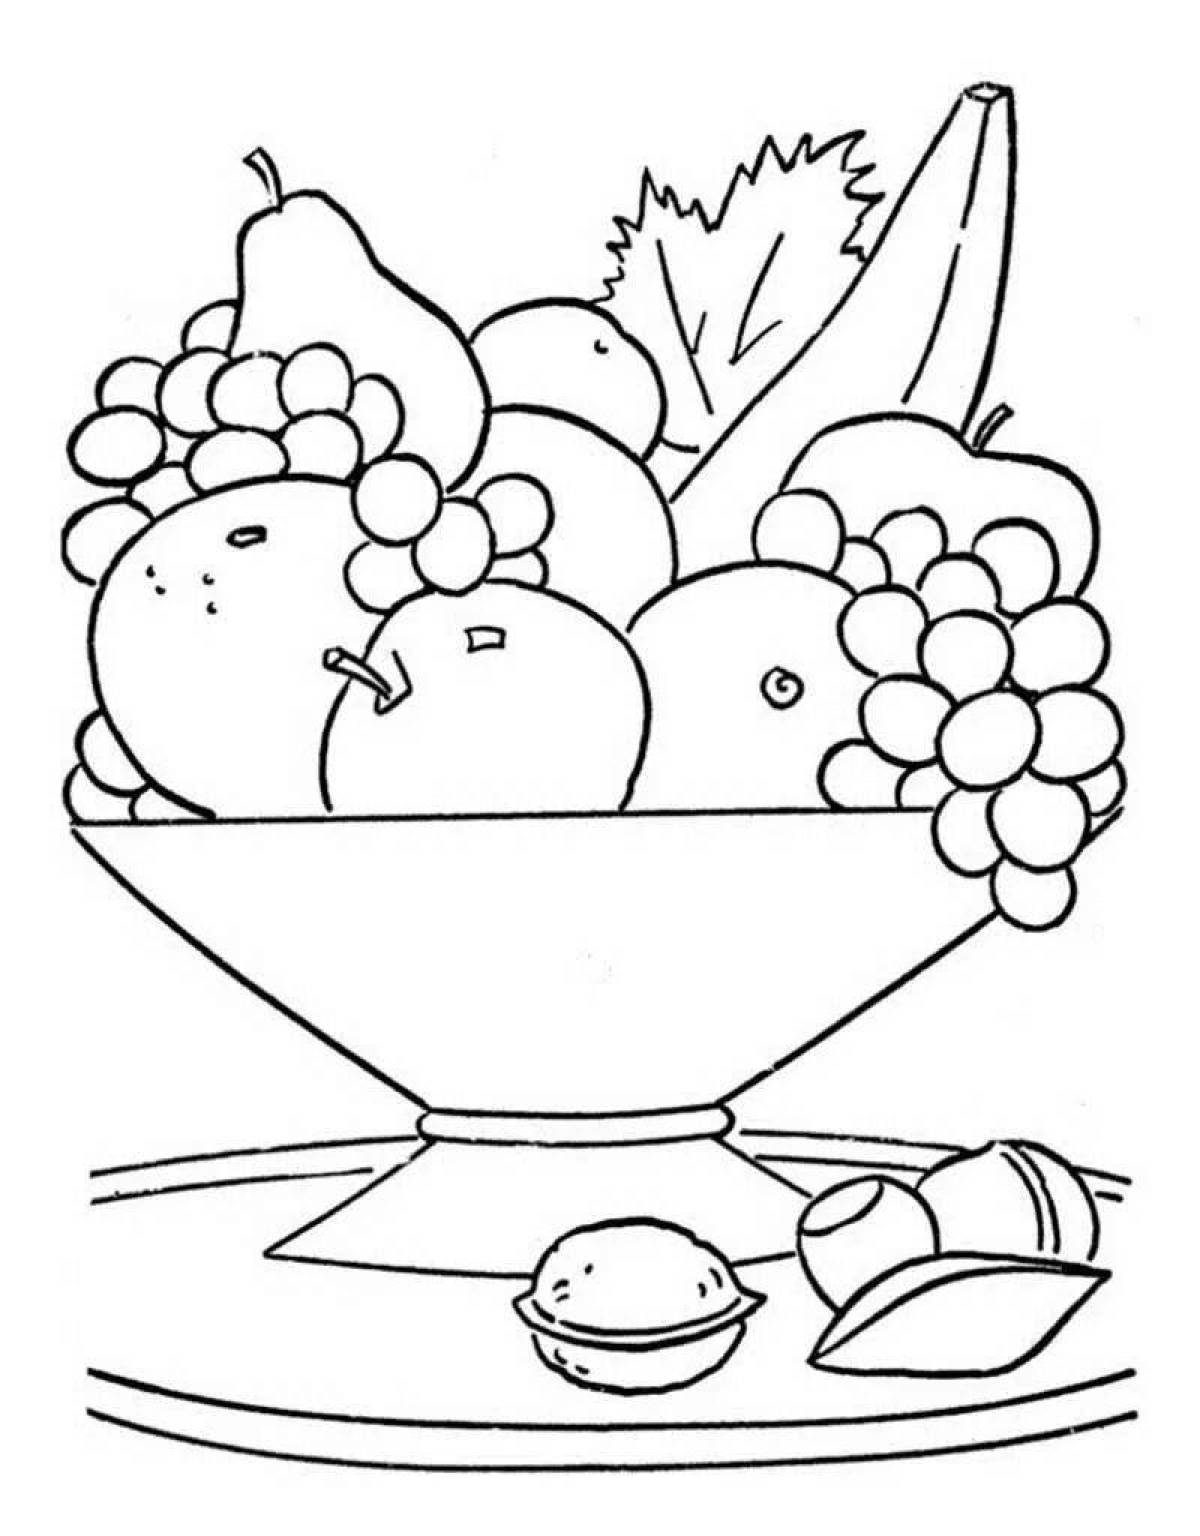 Coloring book sweet fruits for children 5-6 years old